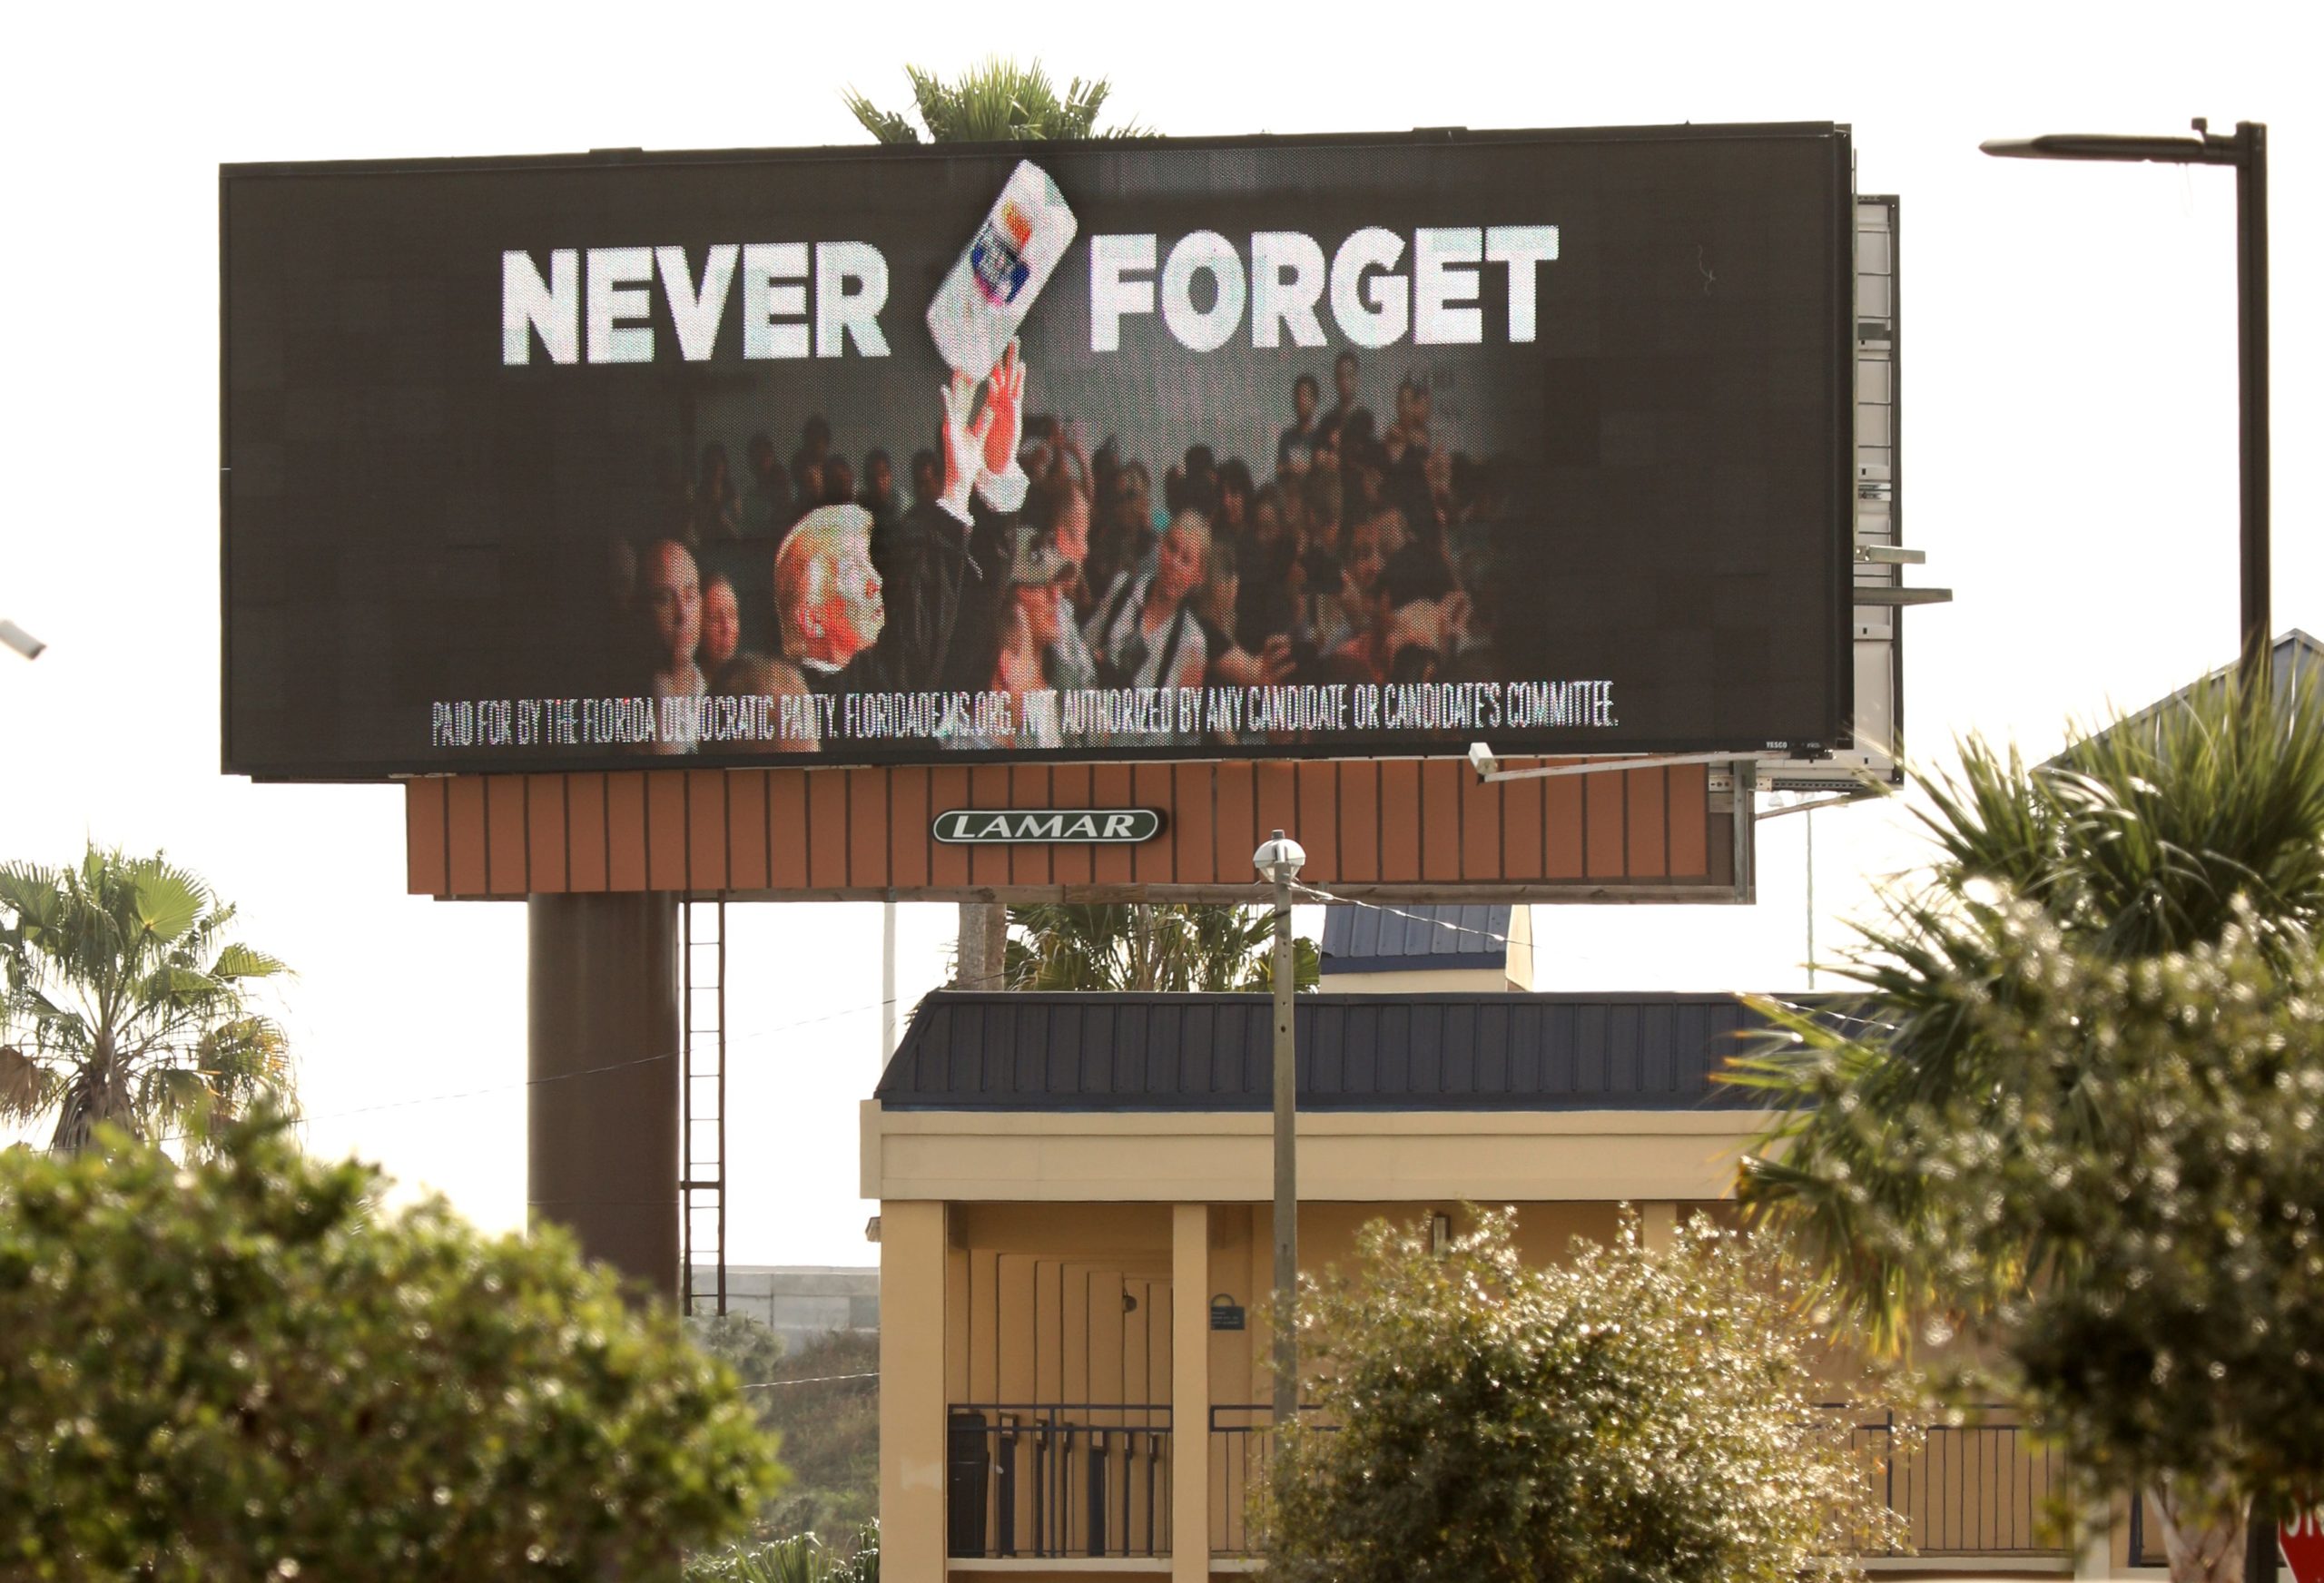 An electronic billboard advertisement paid for by the Florida Democratic Party reading "Never Forget" and showing US President Donald Trump throwing a roll of paper towels is seen along the Florida Turnpike in Kissimmee, Florida, on January 16, 2020. - It shows US President Donald Trump throwing a roll of paper towels to a crowd awaiting aid in Puerto Rico in the aftermath of Hurricane Maria in October of 2017. Some 3,000 people were killed in the natural disaster and many Puerto Rican citizens relocated to central Florida afterward. The billboard ads, in both Spanish and English, are aimed at Latino and Hispanic voters in Florida, which are a significant portion of the state's population. (Photo by Gregg Newton / AFP) (Photo by GREGG NEWTON/AFP via Getty Images)